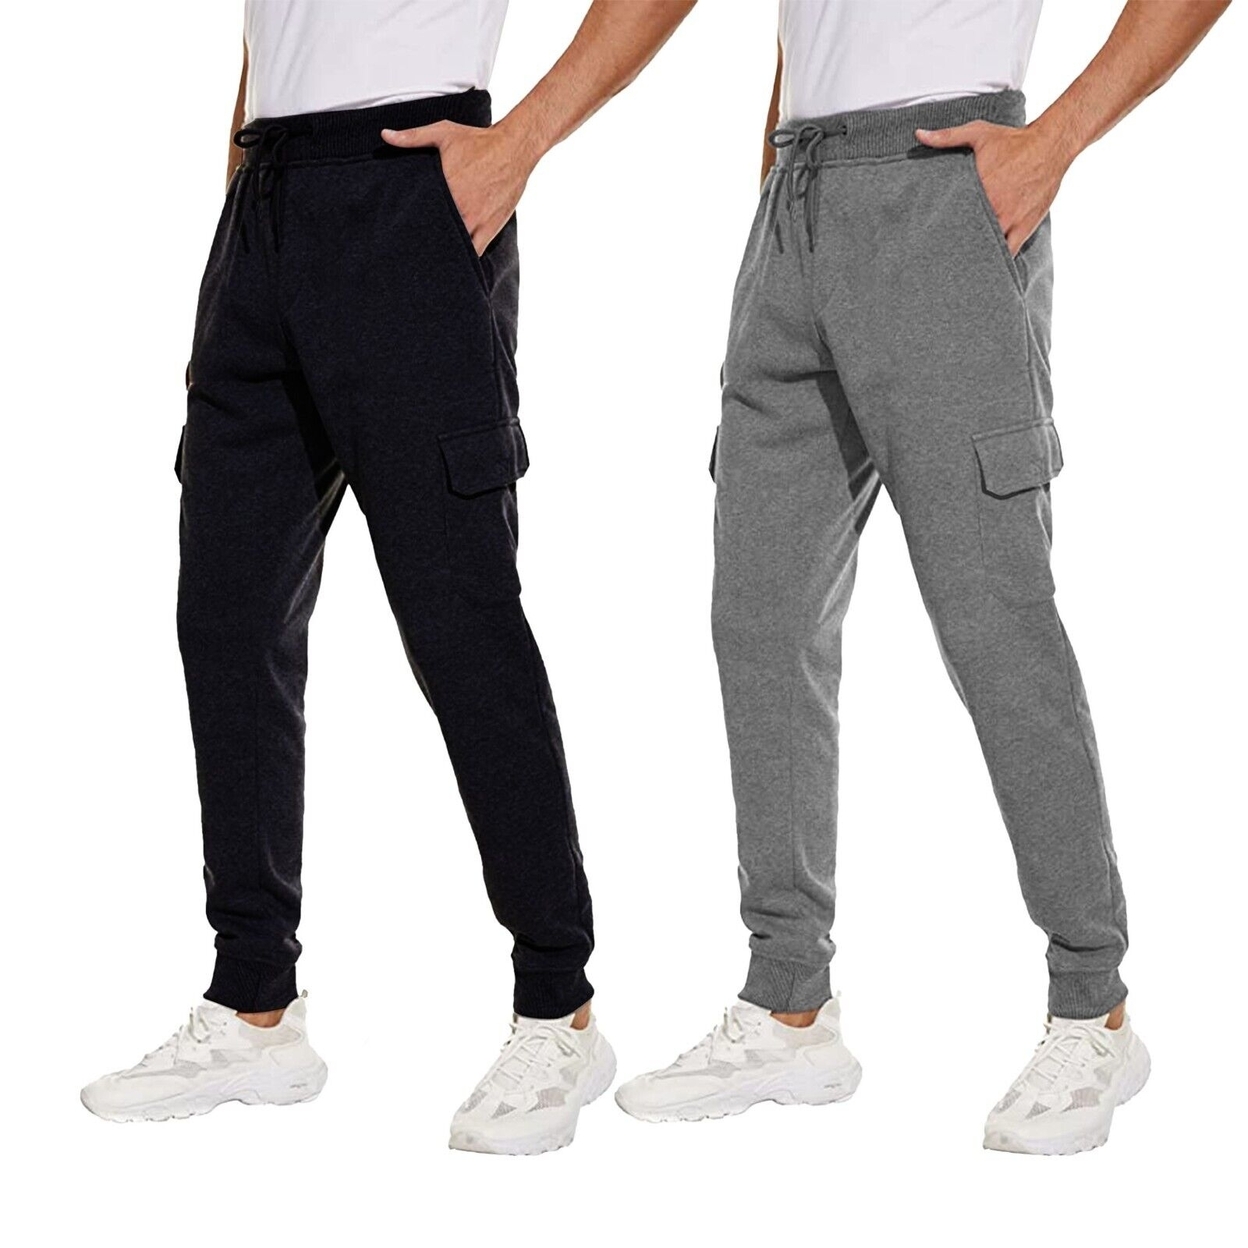 2-Pack Men's Ultra Soft Winter Warm Thick Athletic Sherpa Lined Jogger Pants - Black&grey, 3xl